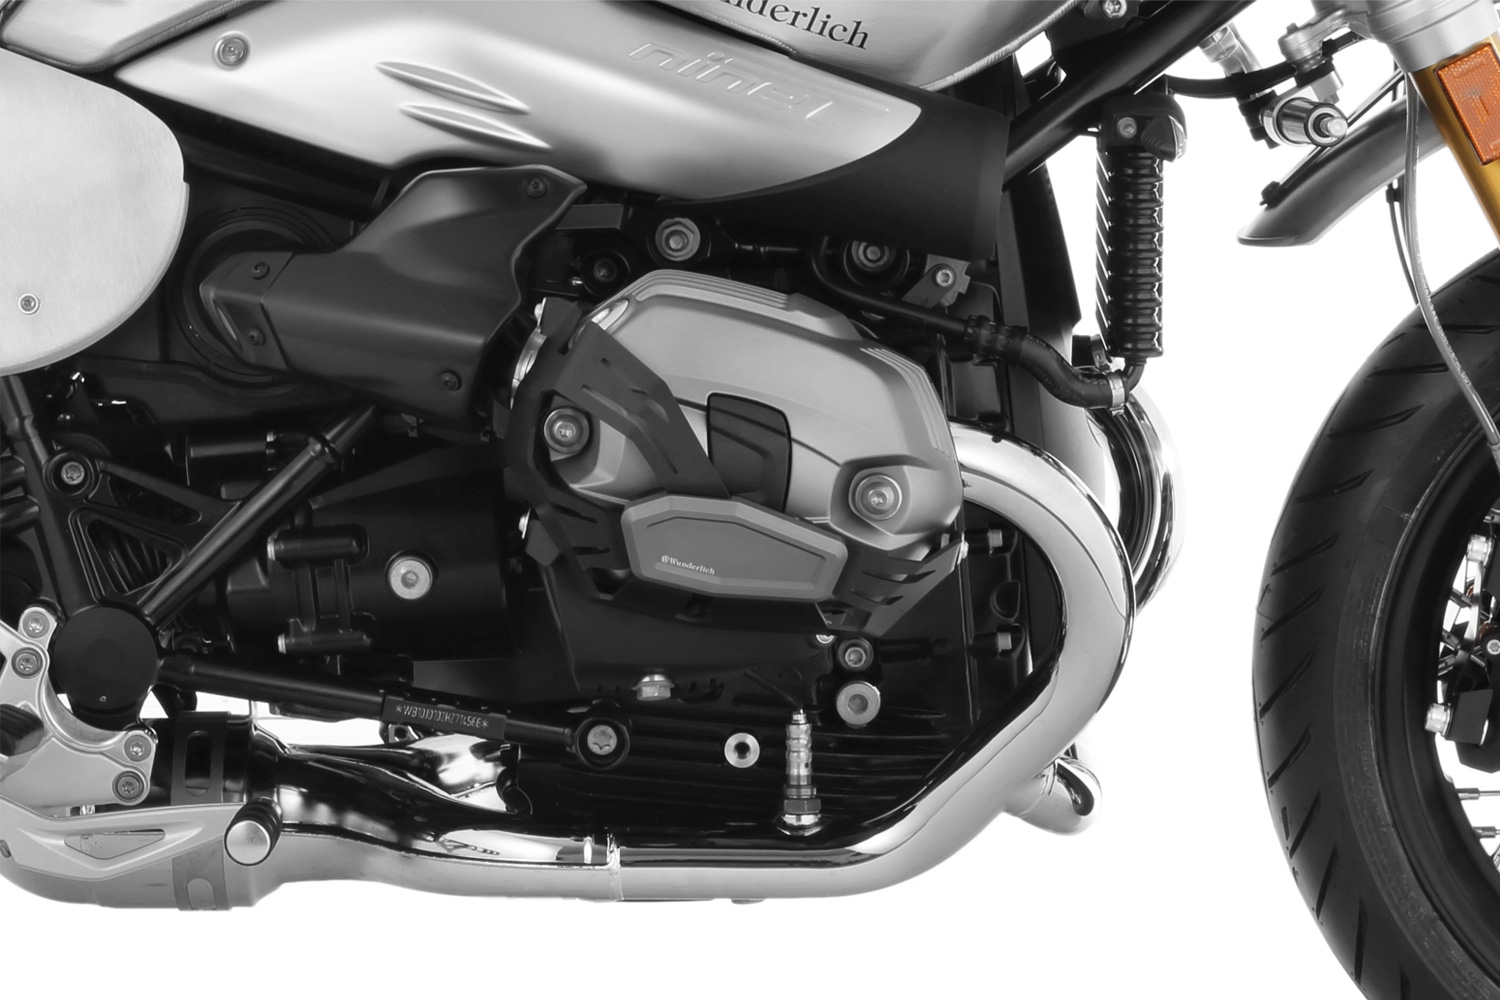 Buy BMW R 1200 GS accessories